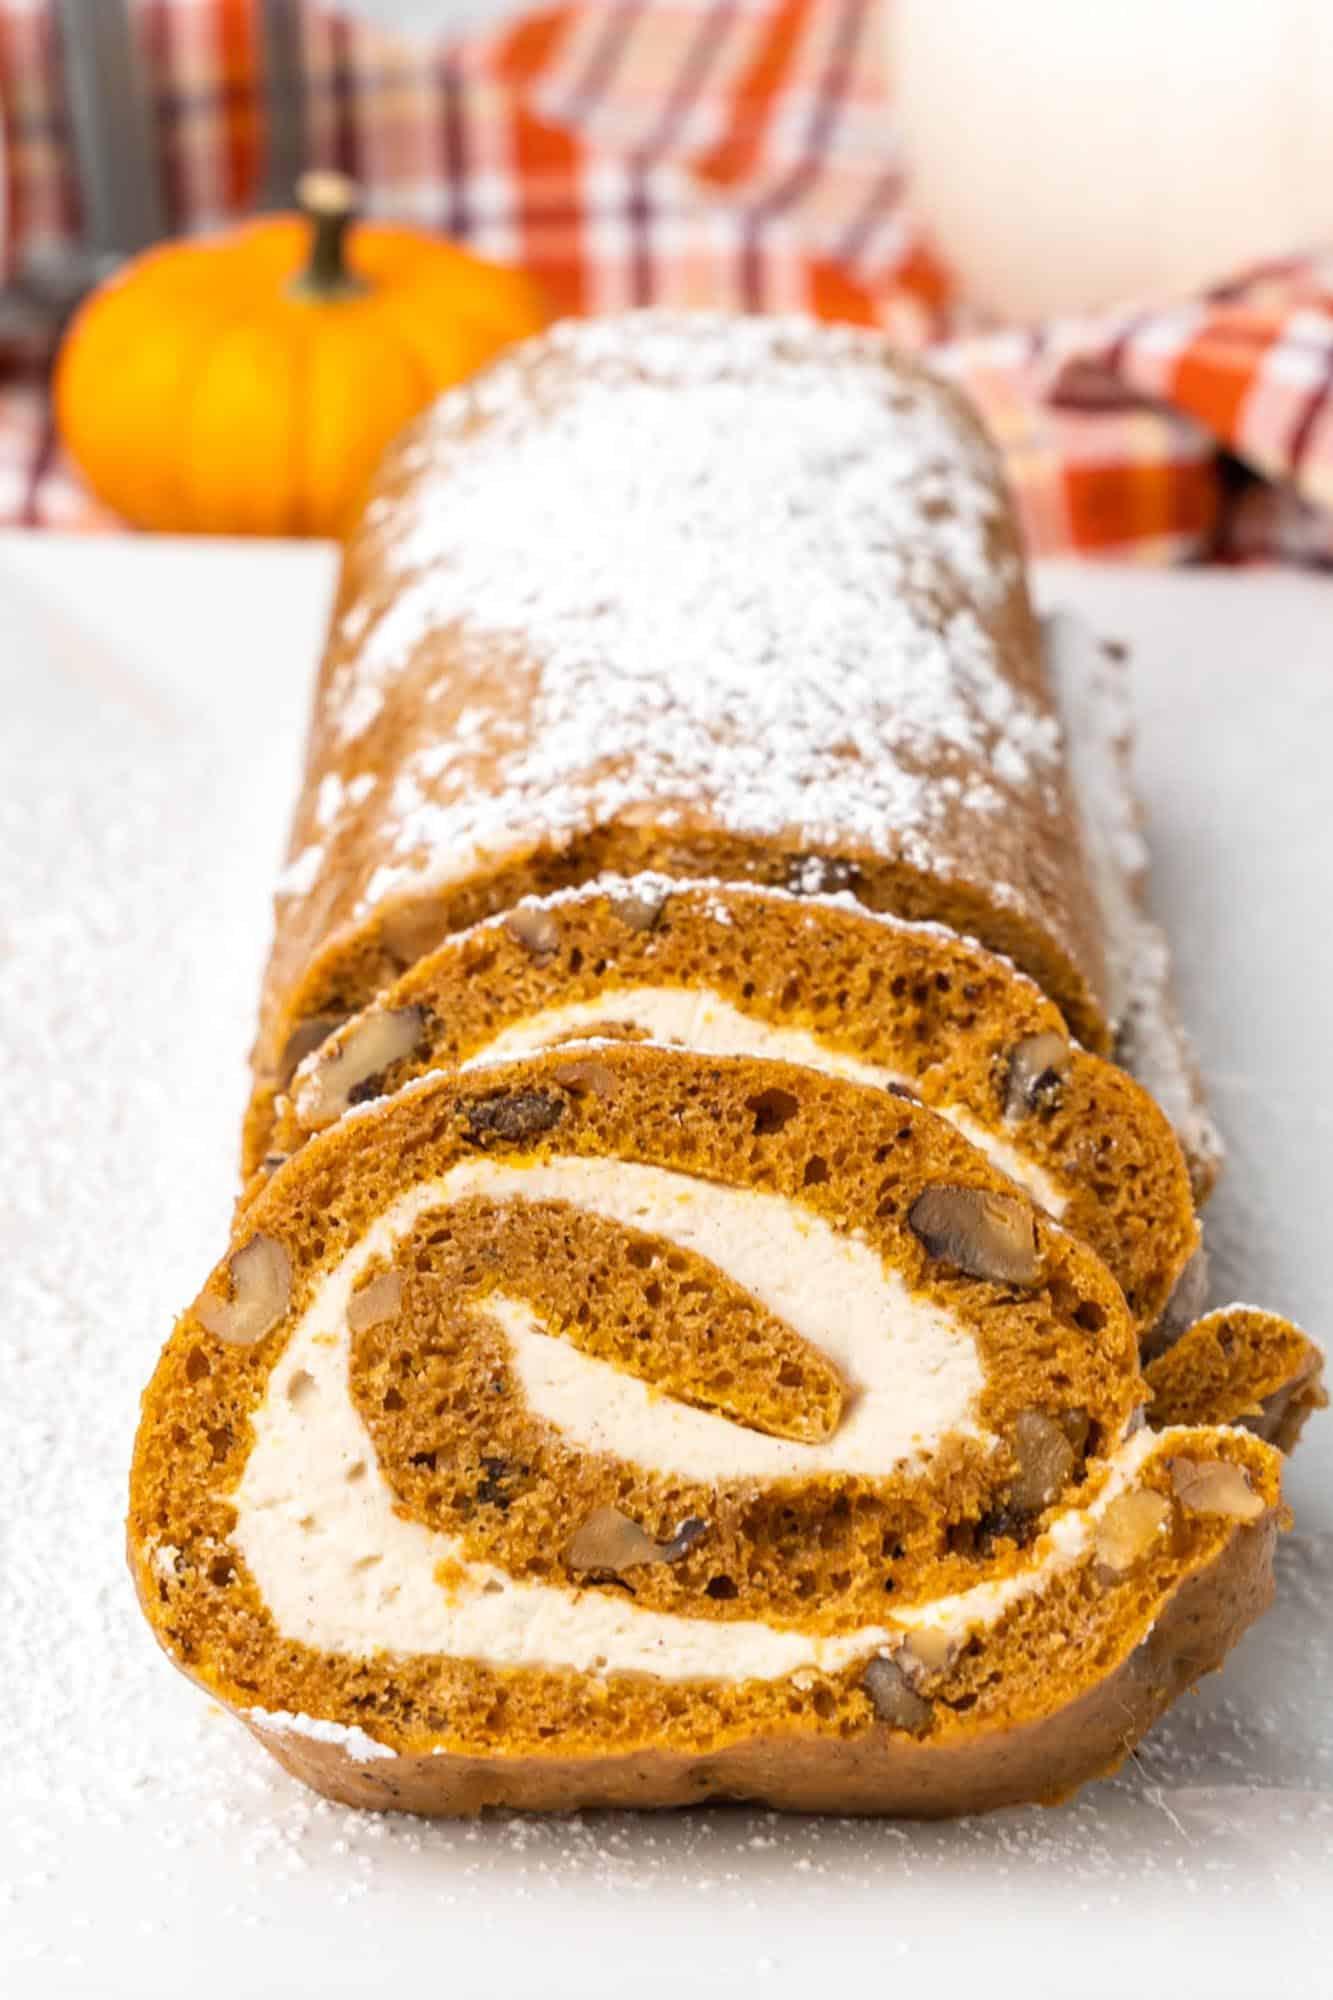 Sliced pumpkin roll cake, viewed from one end. Slices show cream cheese frosting swirled inside.